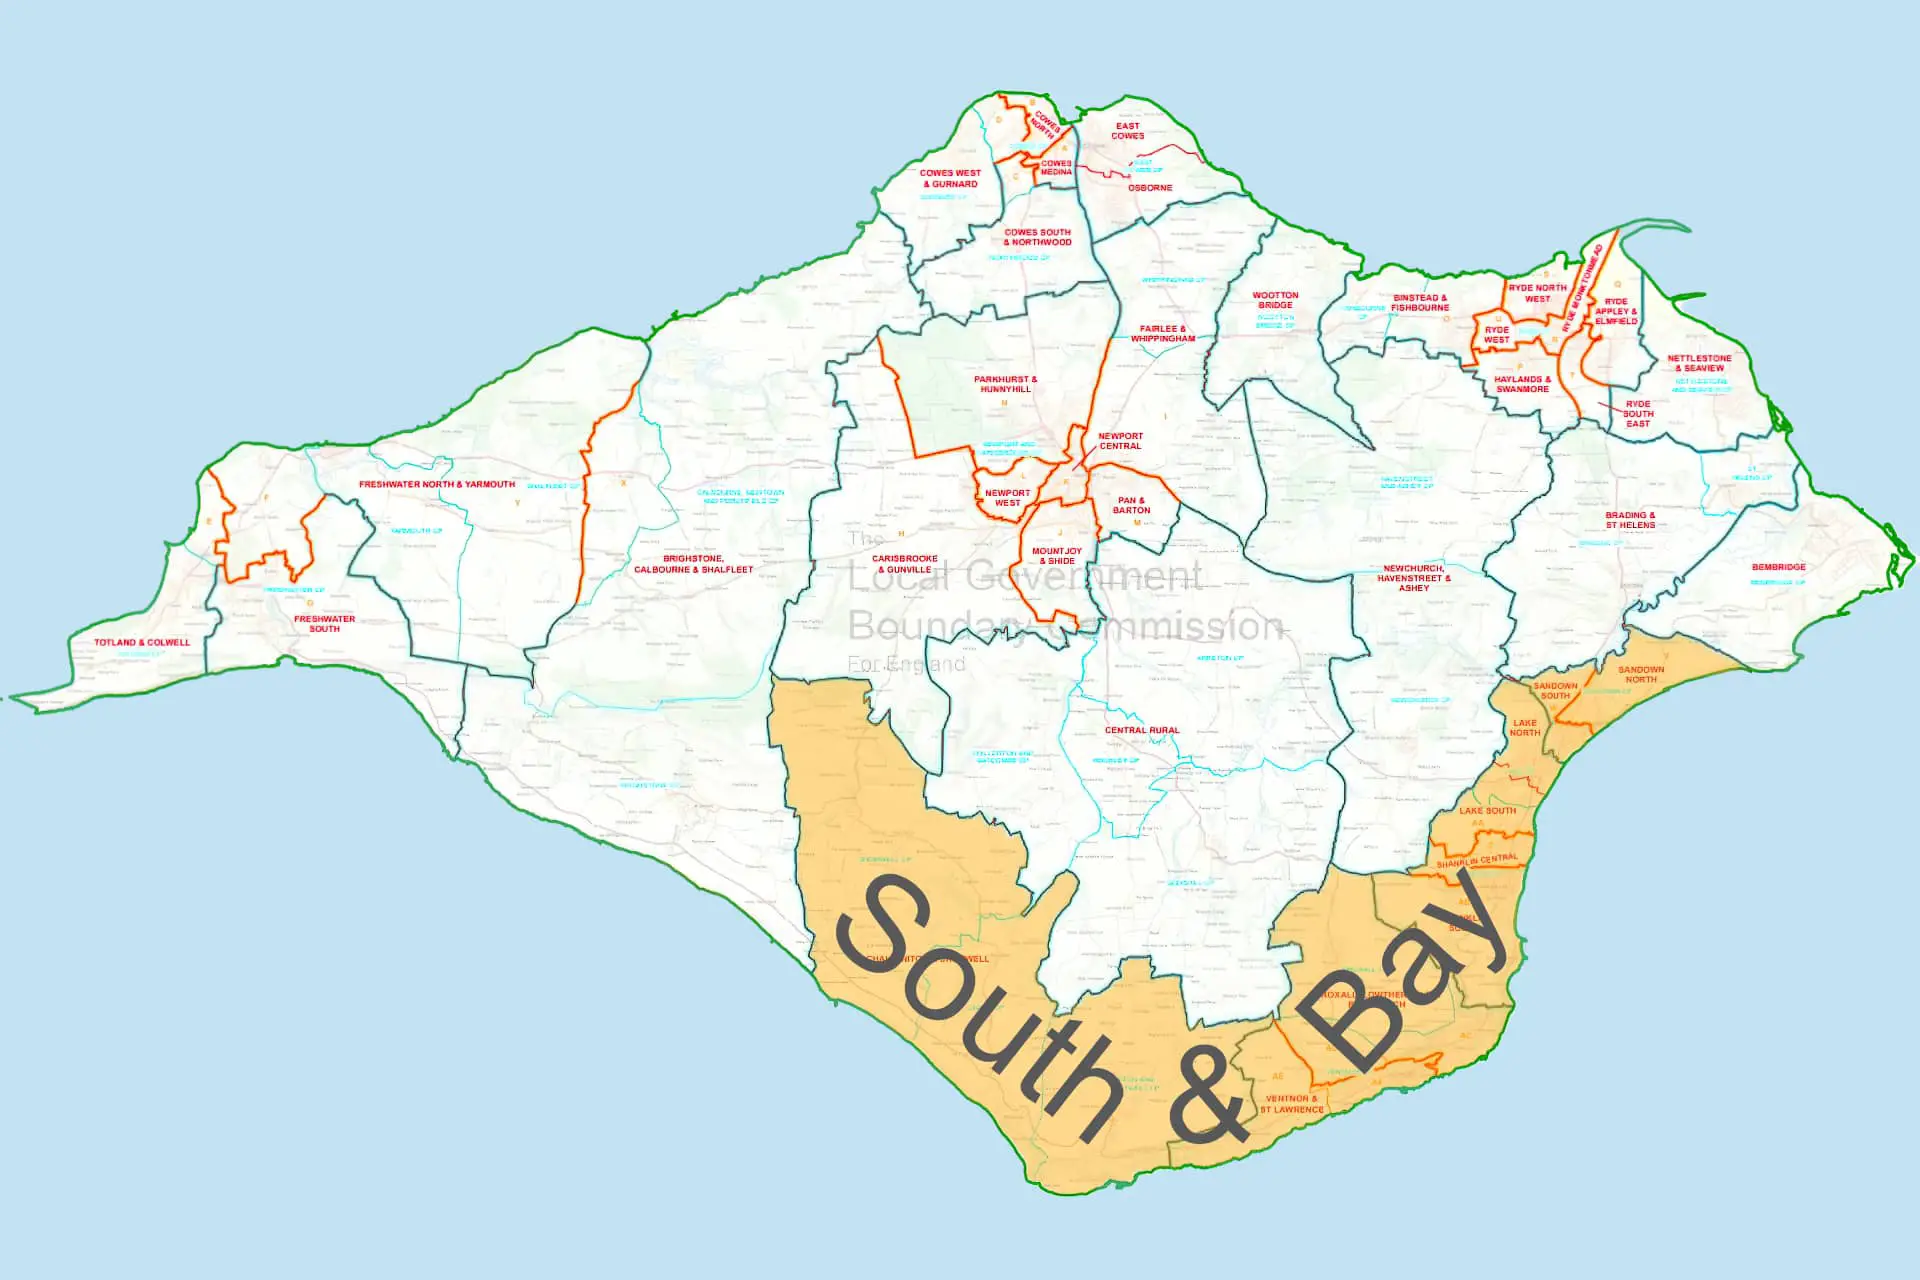 Isle of Wight - Boundary map - South and Bay (comp)